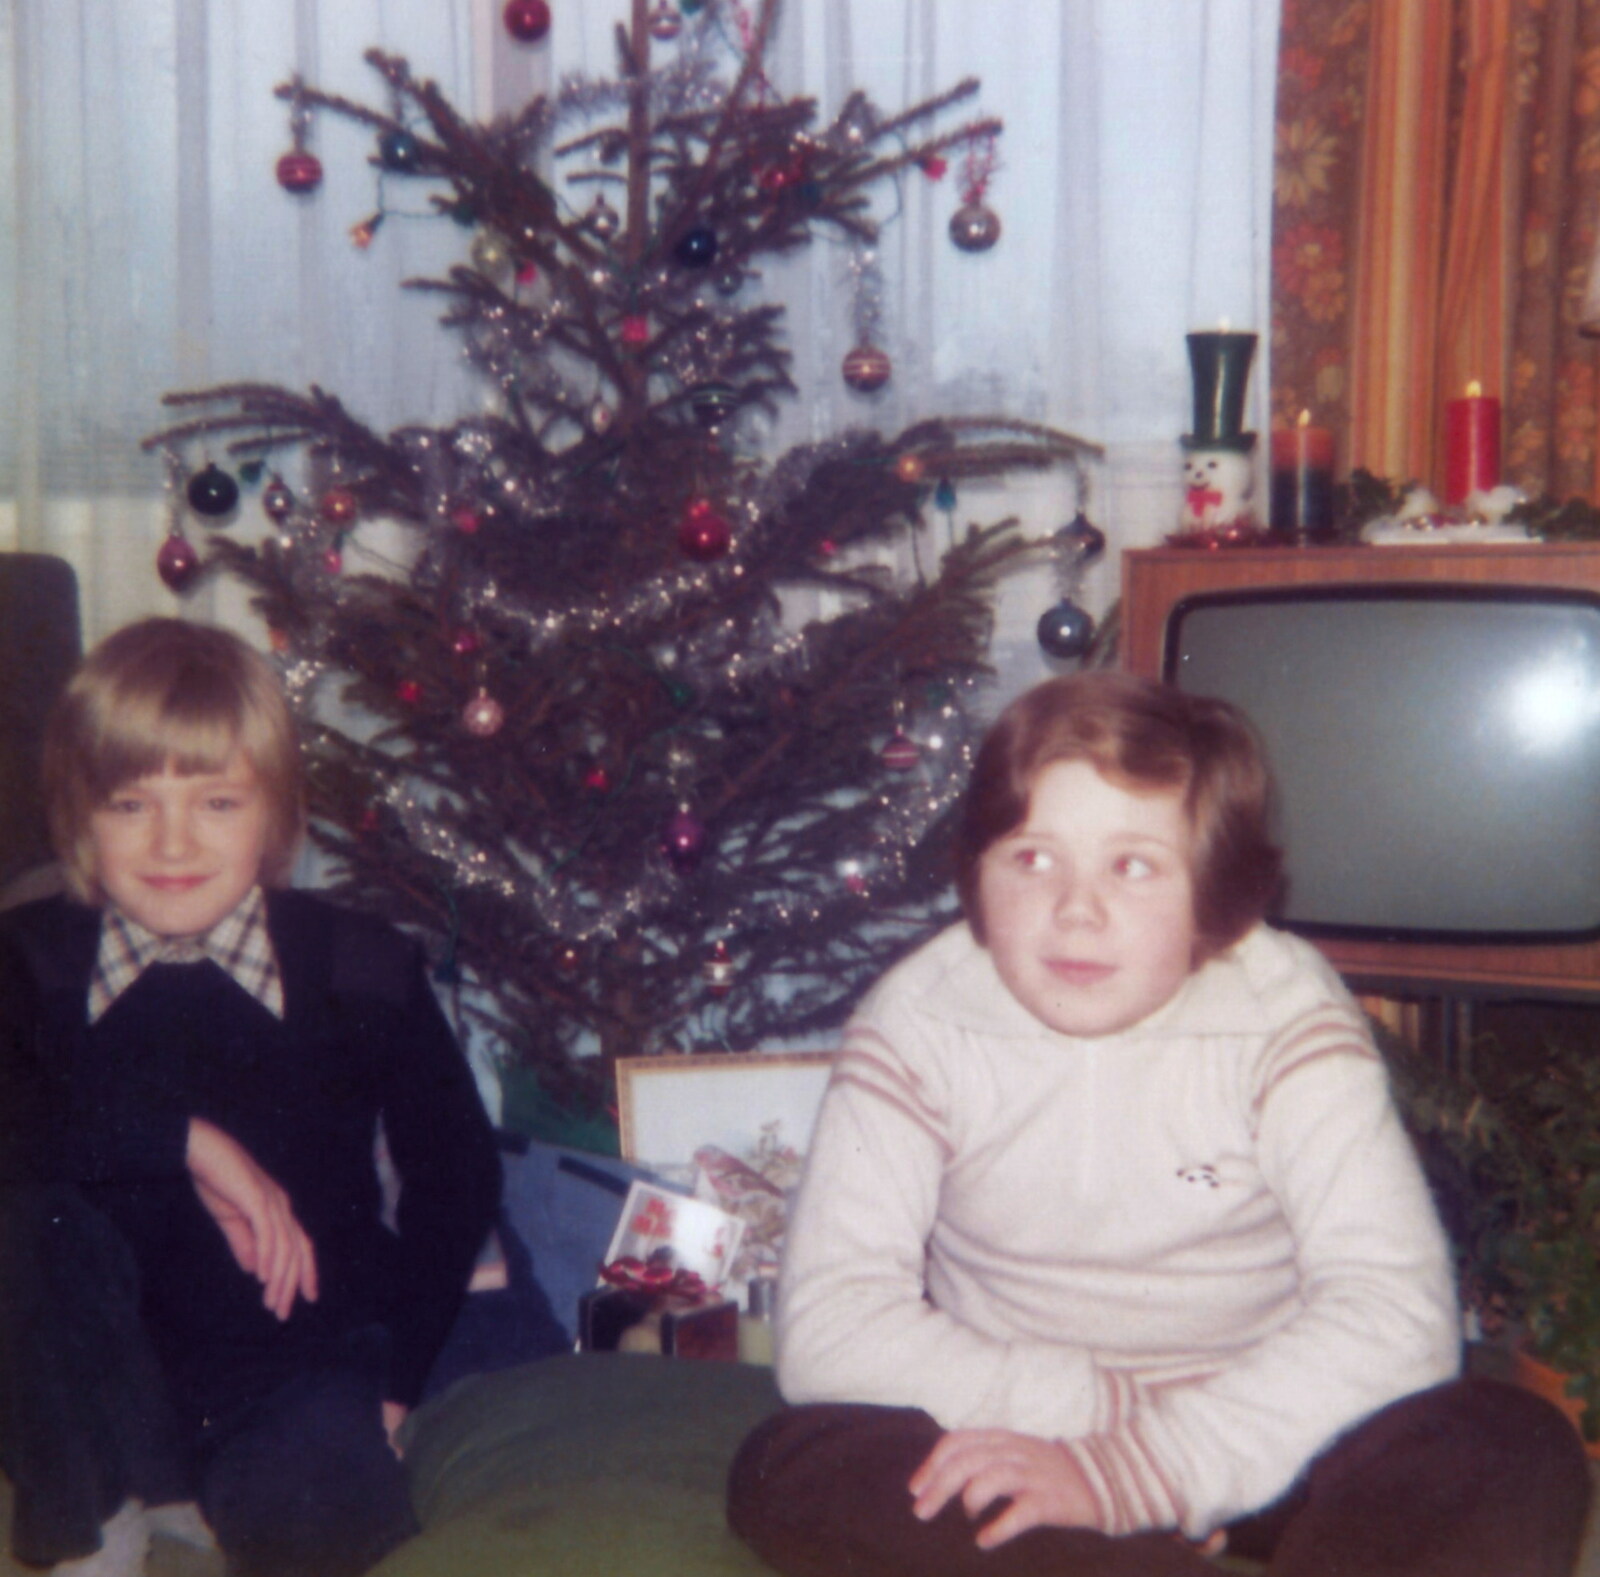 Family History: Danesbury Avenue, Tuckton, Christchurch, Dorset - 24th January 2020: Nosher and Sis in front of the Christmas tree